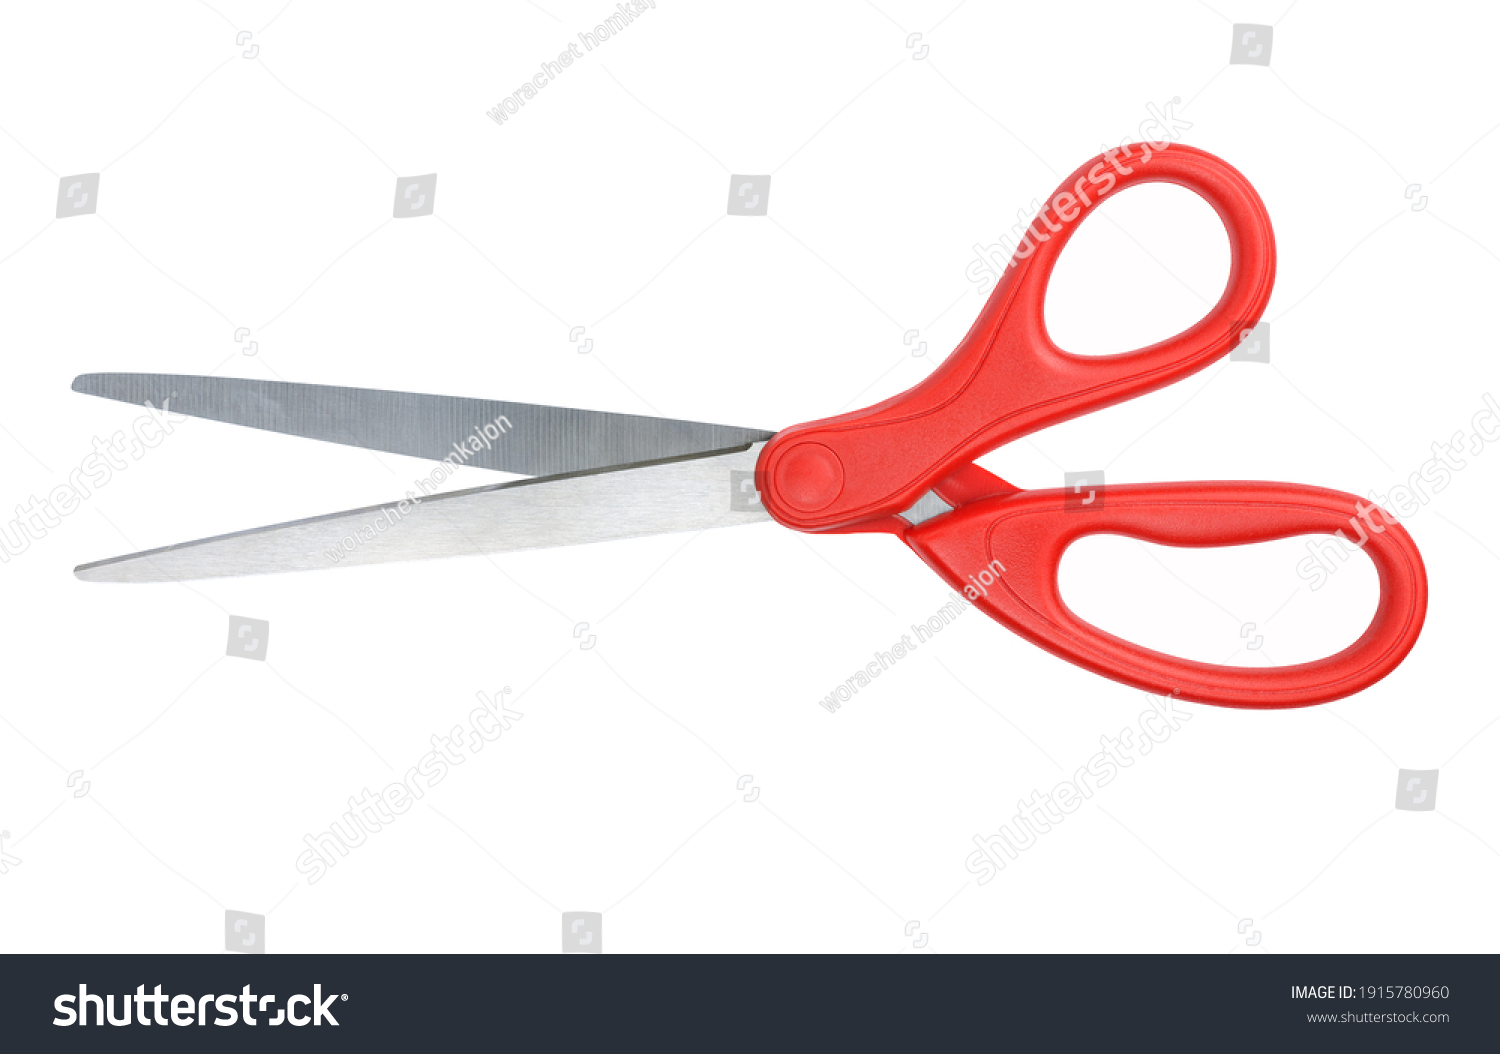 Red scissors isolated on white background #1915780960